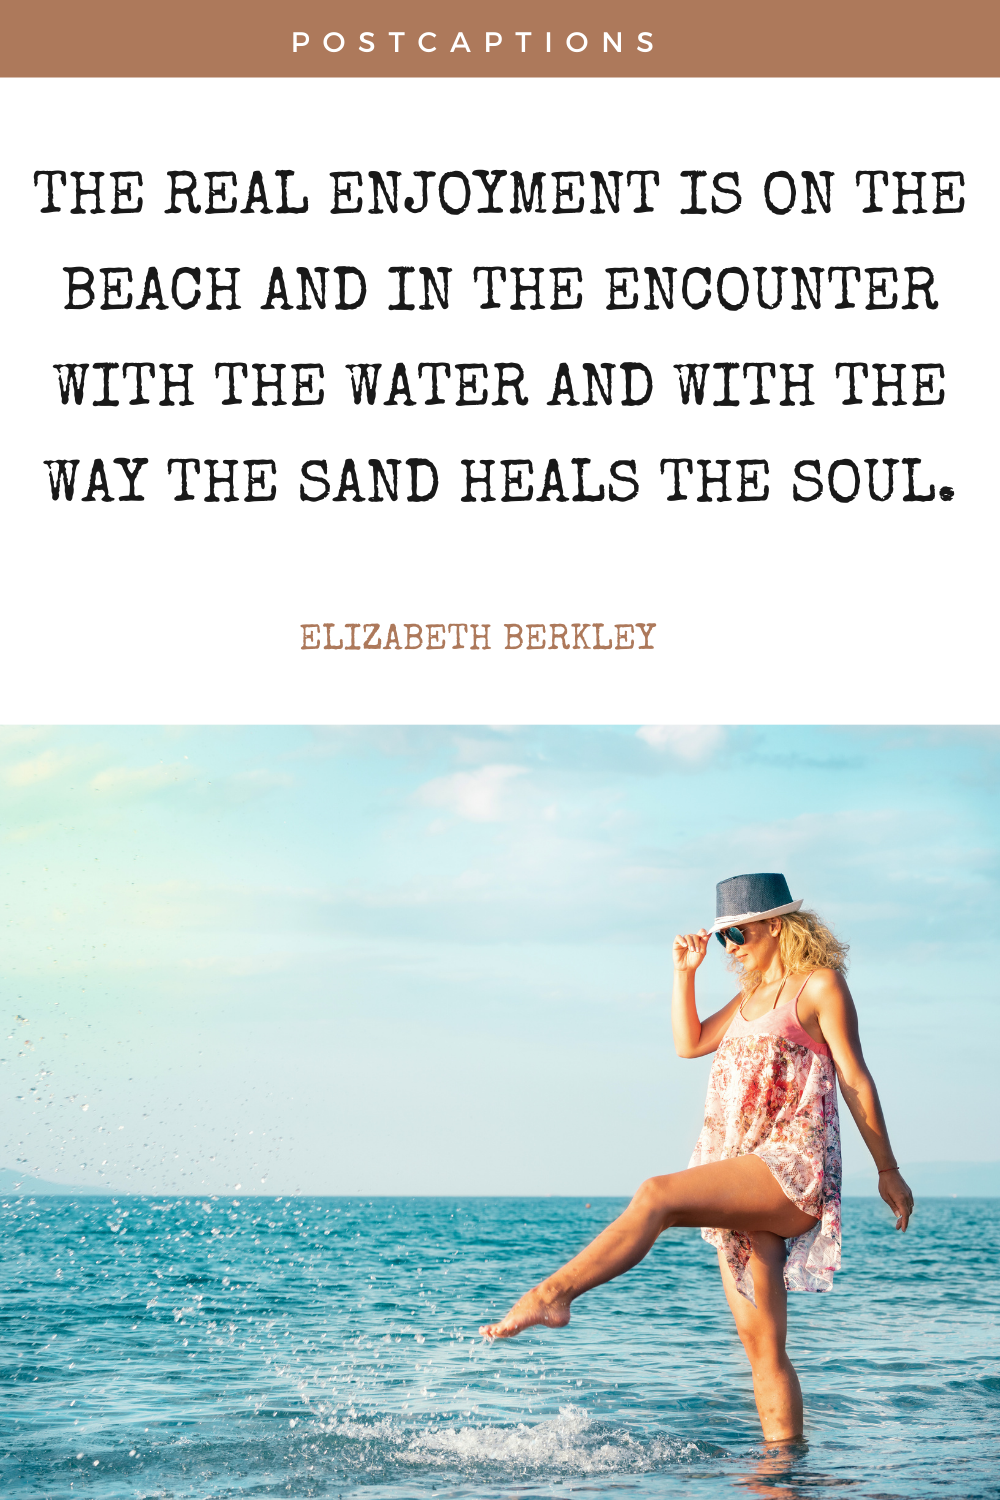 Beach quotes for Instagram captions